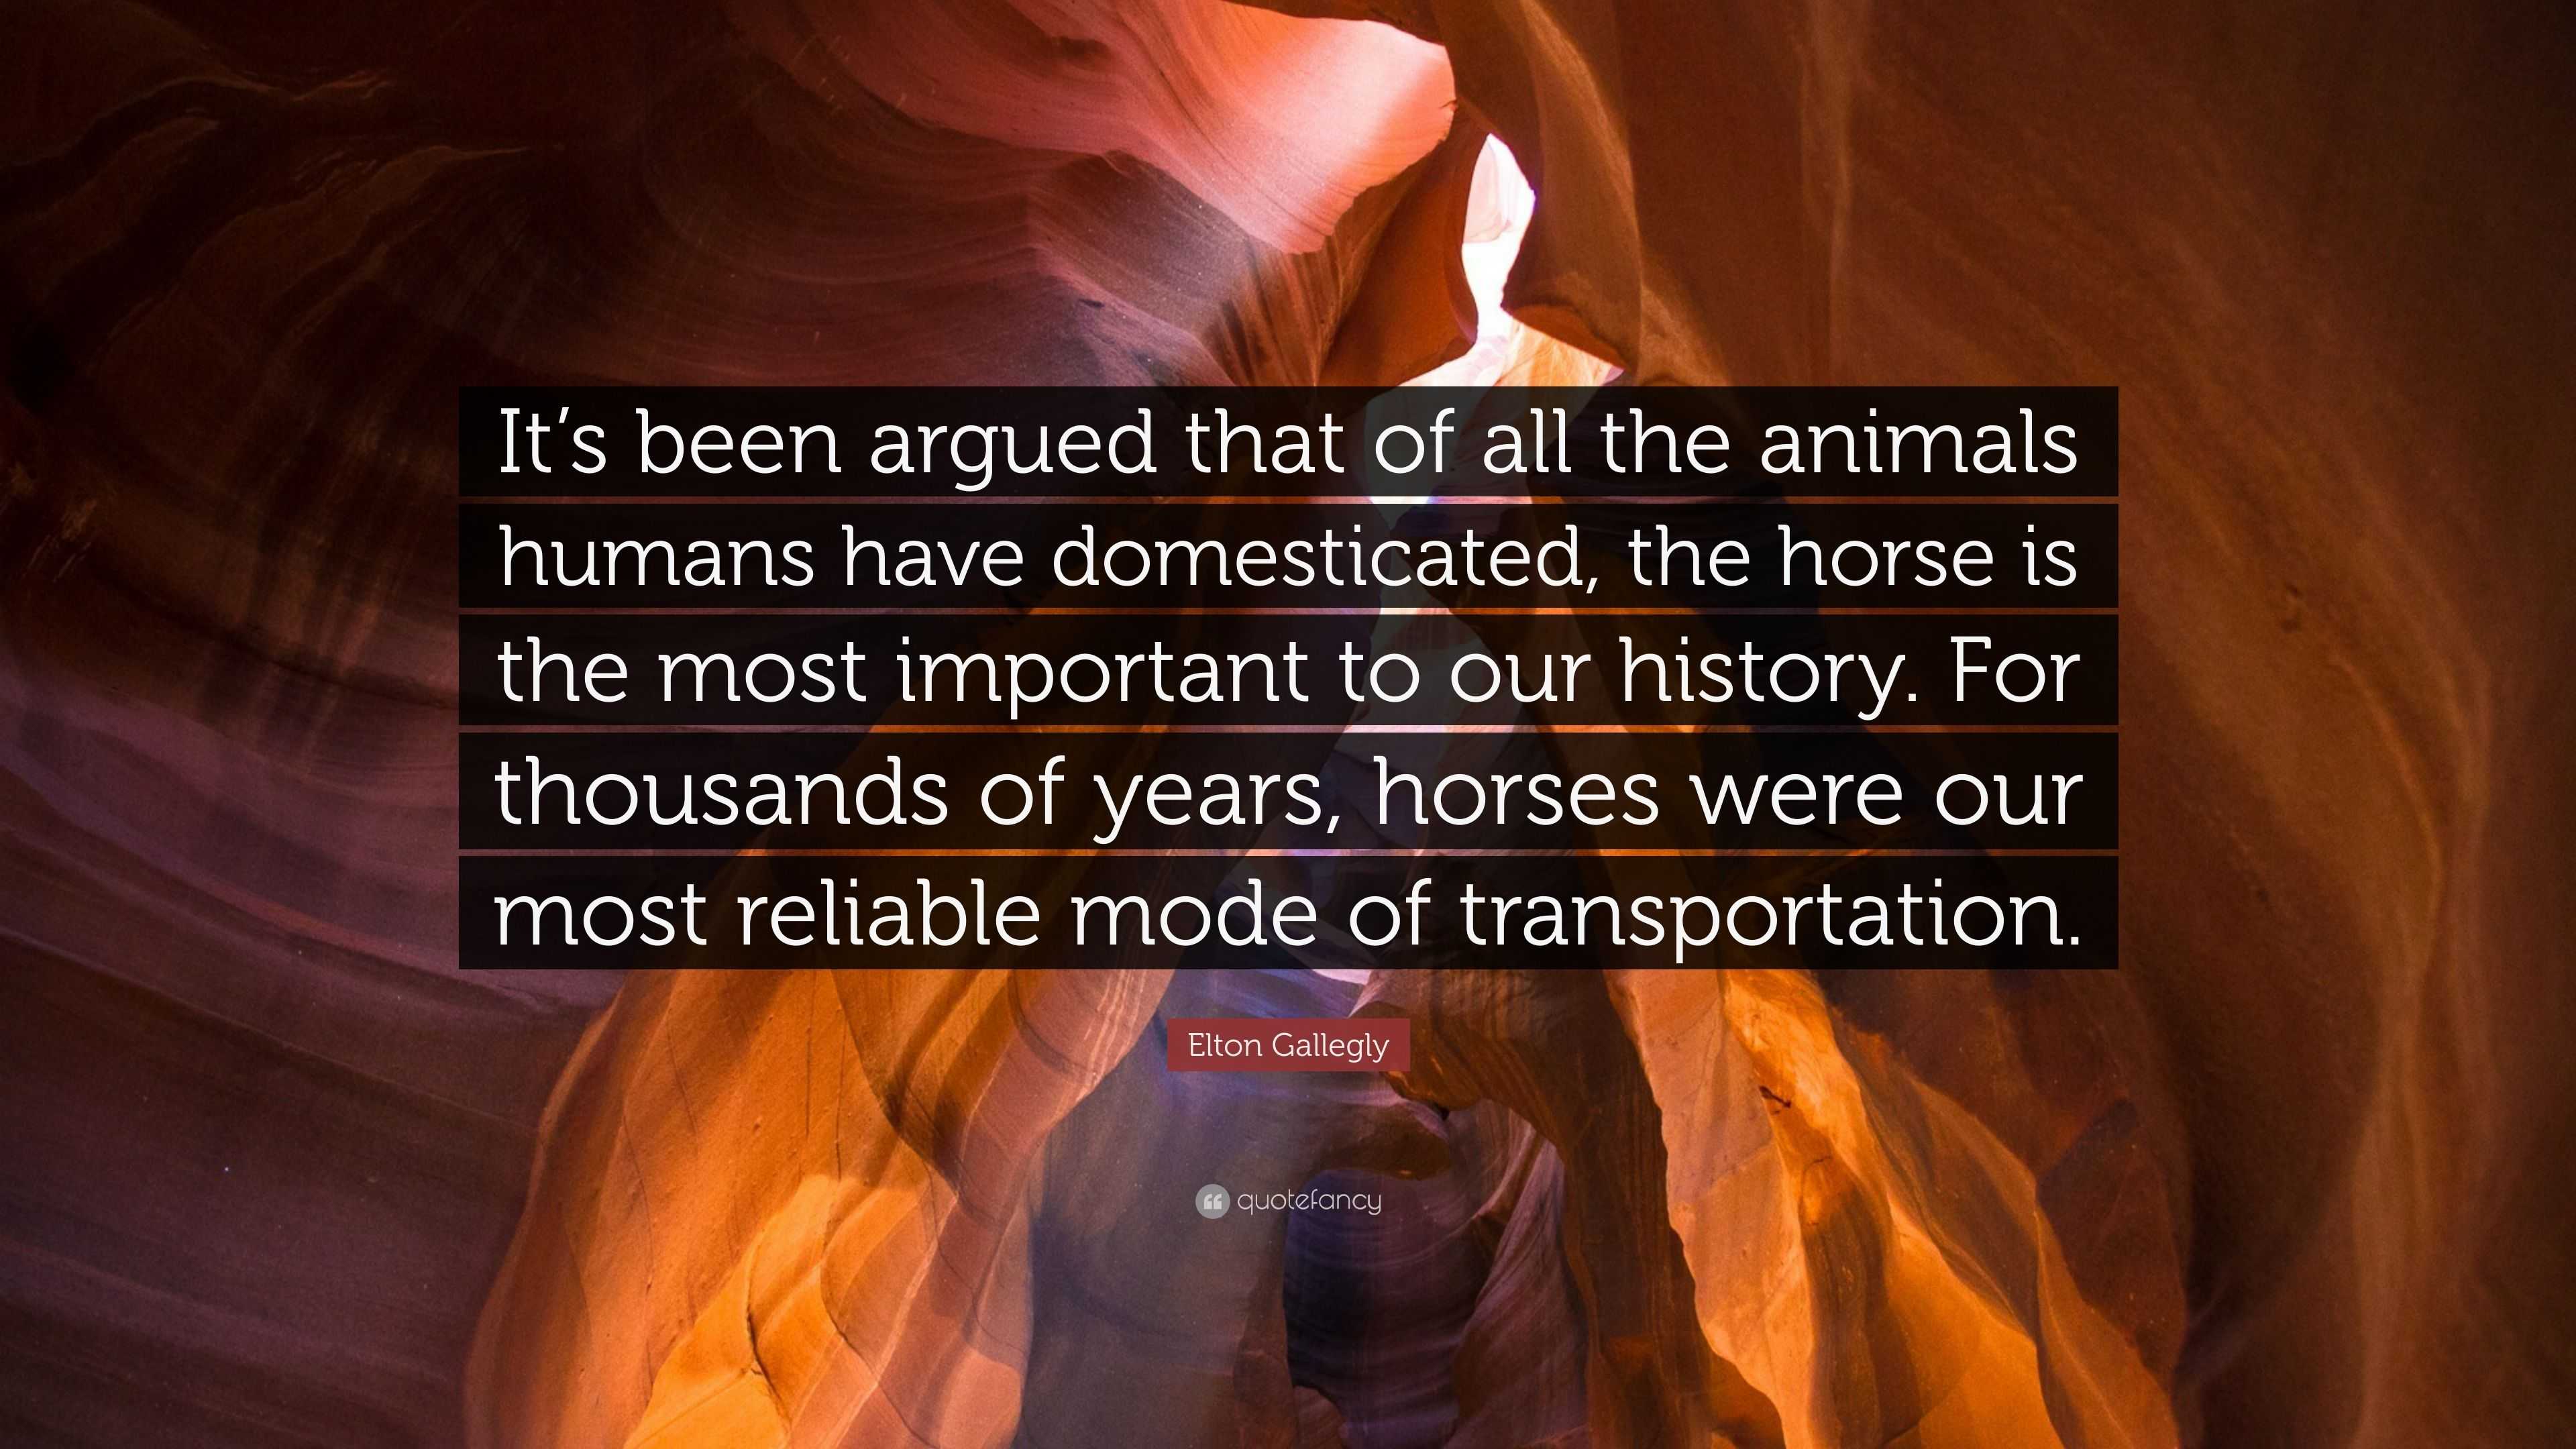 Elton Gallegly Quote: “It's been argued that of all the animals humans have  domesticated, the horse is the most important to our history. For t...”